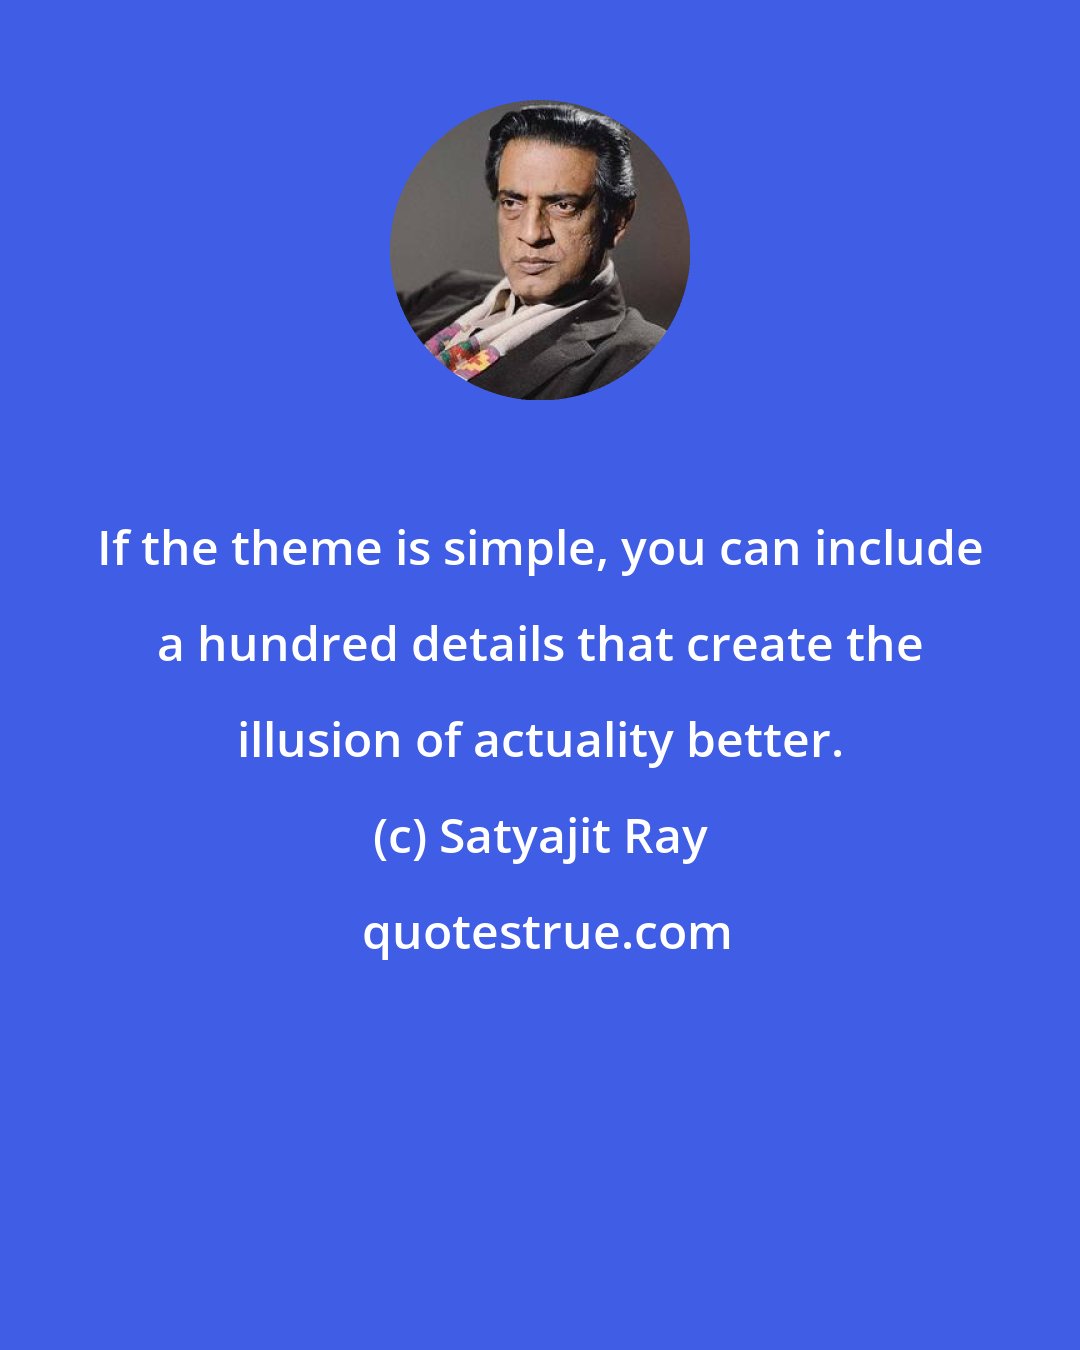 Satyajit Ray: If the theme is simple, you can include a hundred details that create the illusion of actuality better.